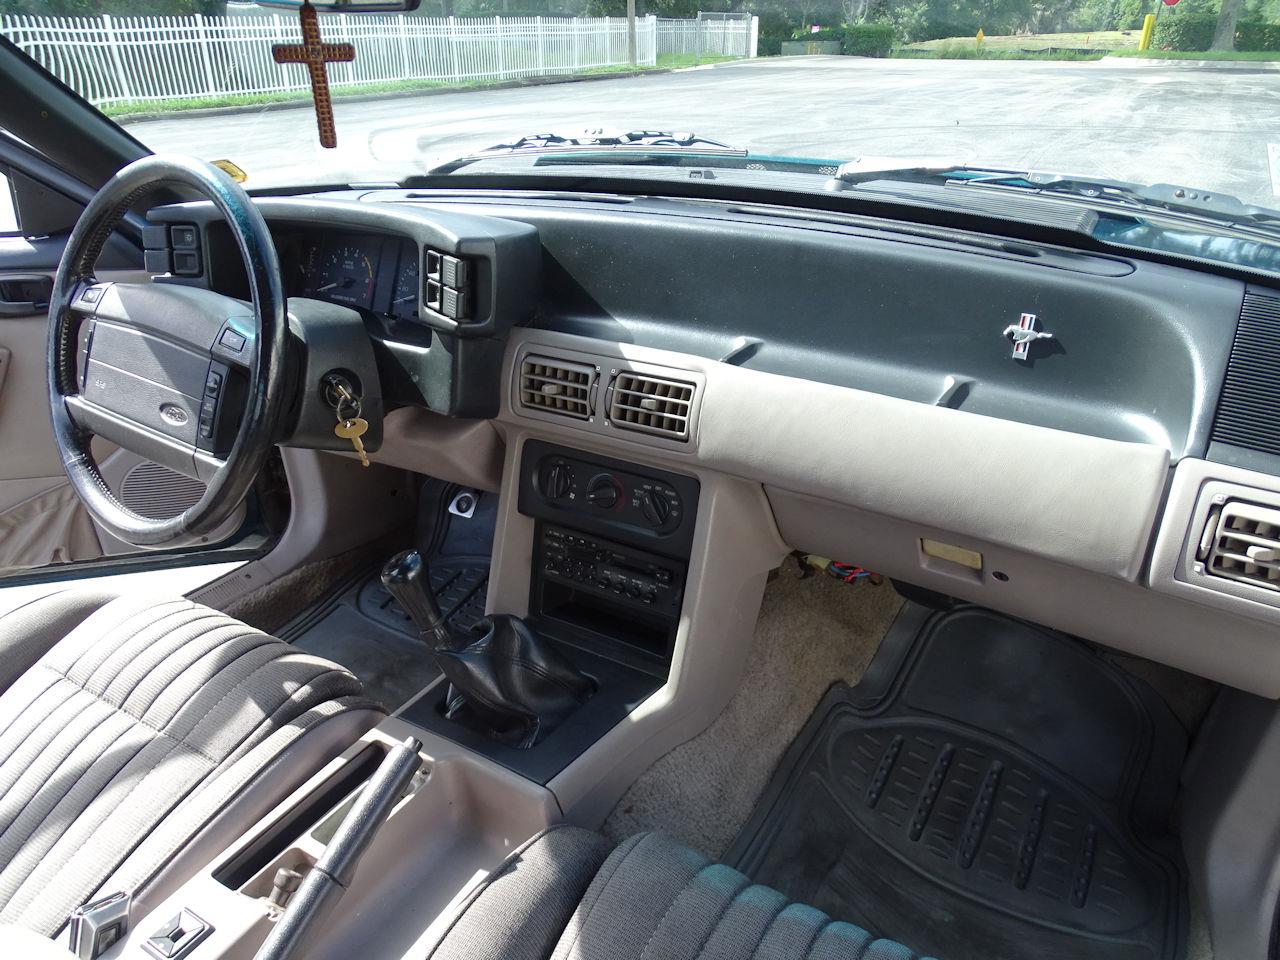 1992 Ford Mustang for sale in O'Fallon, IL – photo 95